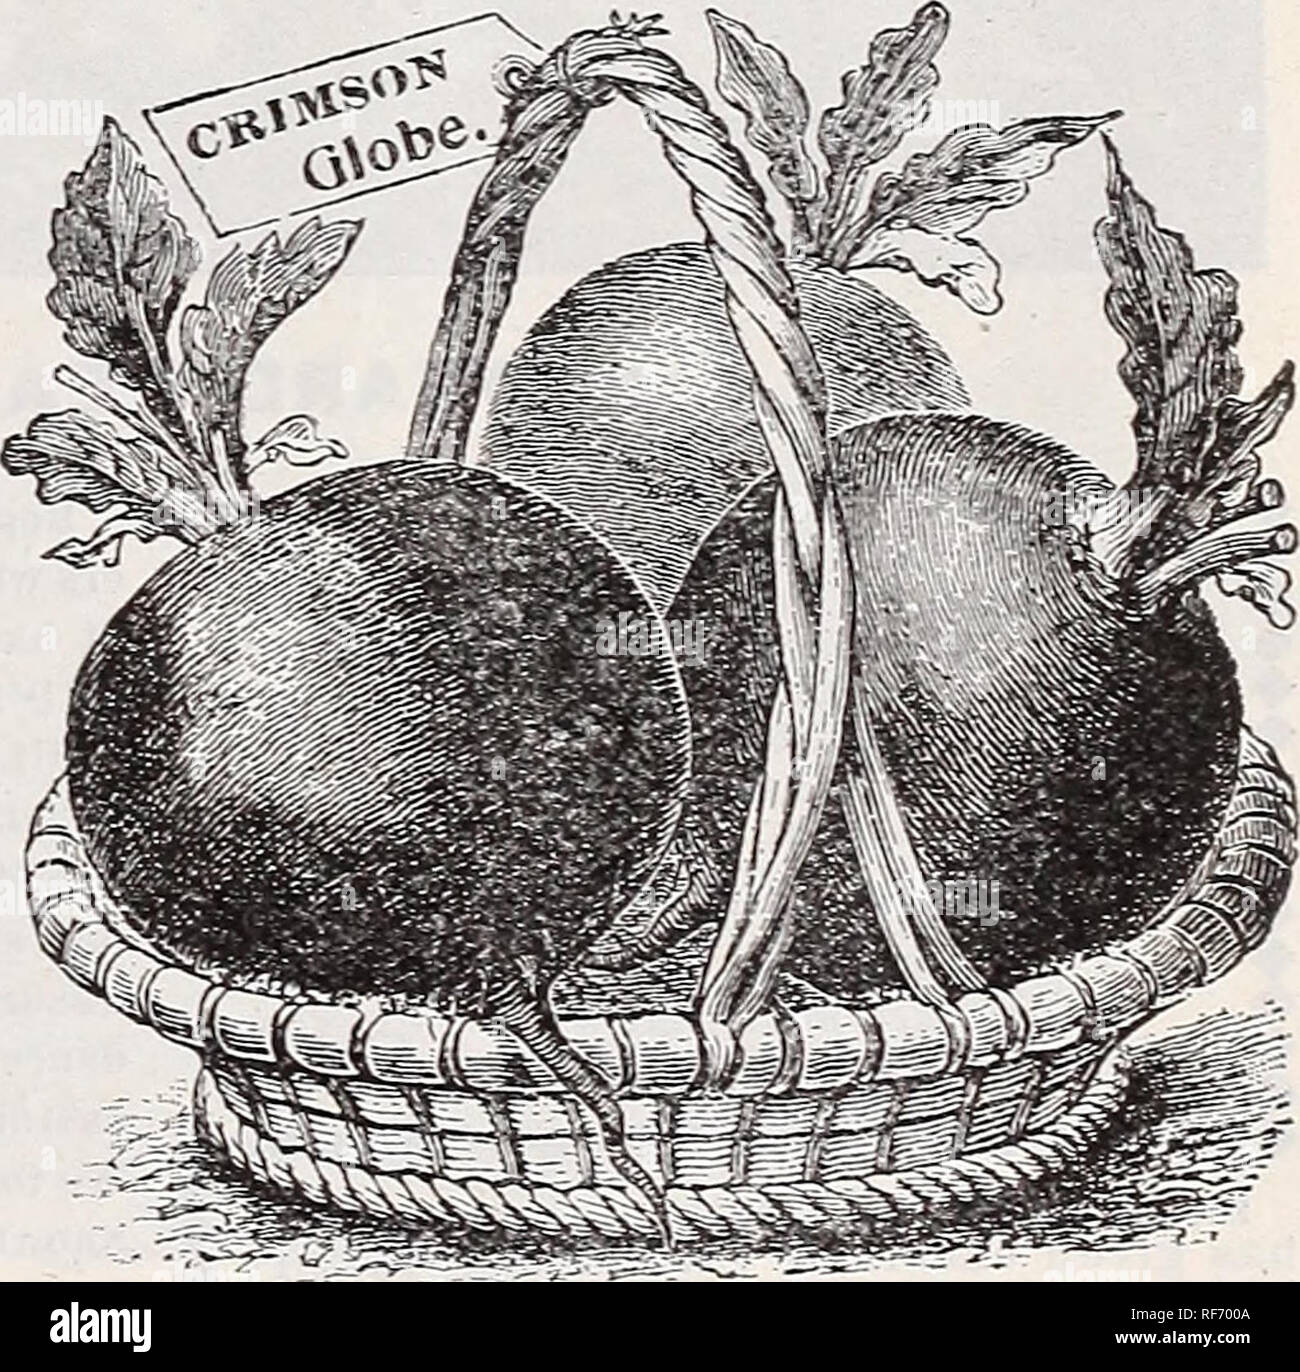 . Leonard's market gardeners' catalogue : season 1902. Nursery stock Illinois Chicago Catalogs; Vegetables Seeds Catalogs; Gardening Equipment and supplies Catalogs. Leonard's Ex. Early Egyptian. BEETS. TABLE VARIETIES. LEONARD'S EXTRA EARLY EGYPTLiX. This is the earliest and best bunching beet for market gardeners. Our strain produces the first early beets on the Chicag-o market. Thick, smooth, and very deep red. Good size, sweet and tender. Oz.. 10c.: }i lb., loc; lb., 50c. Crosby's Egyptian. A few days later than the Leonard's strain. A very desirable sort for early market. Of finer quality Stock Photo